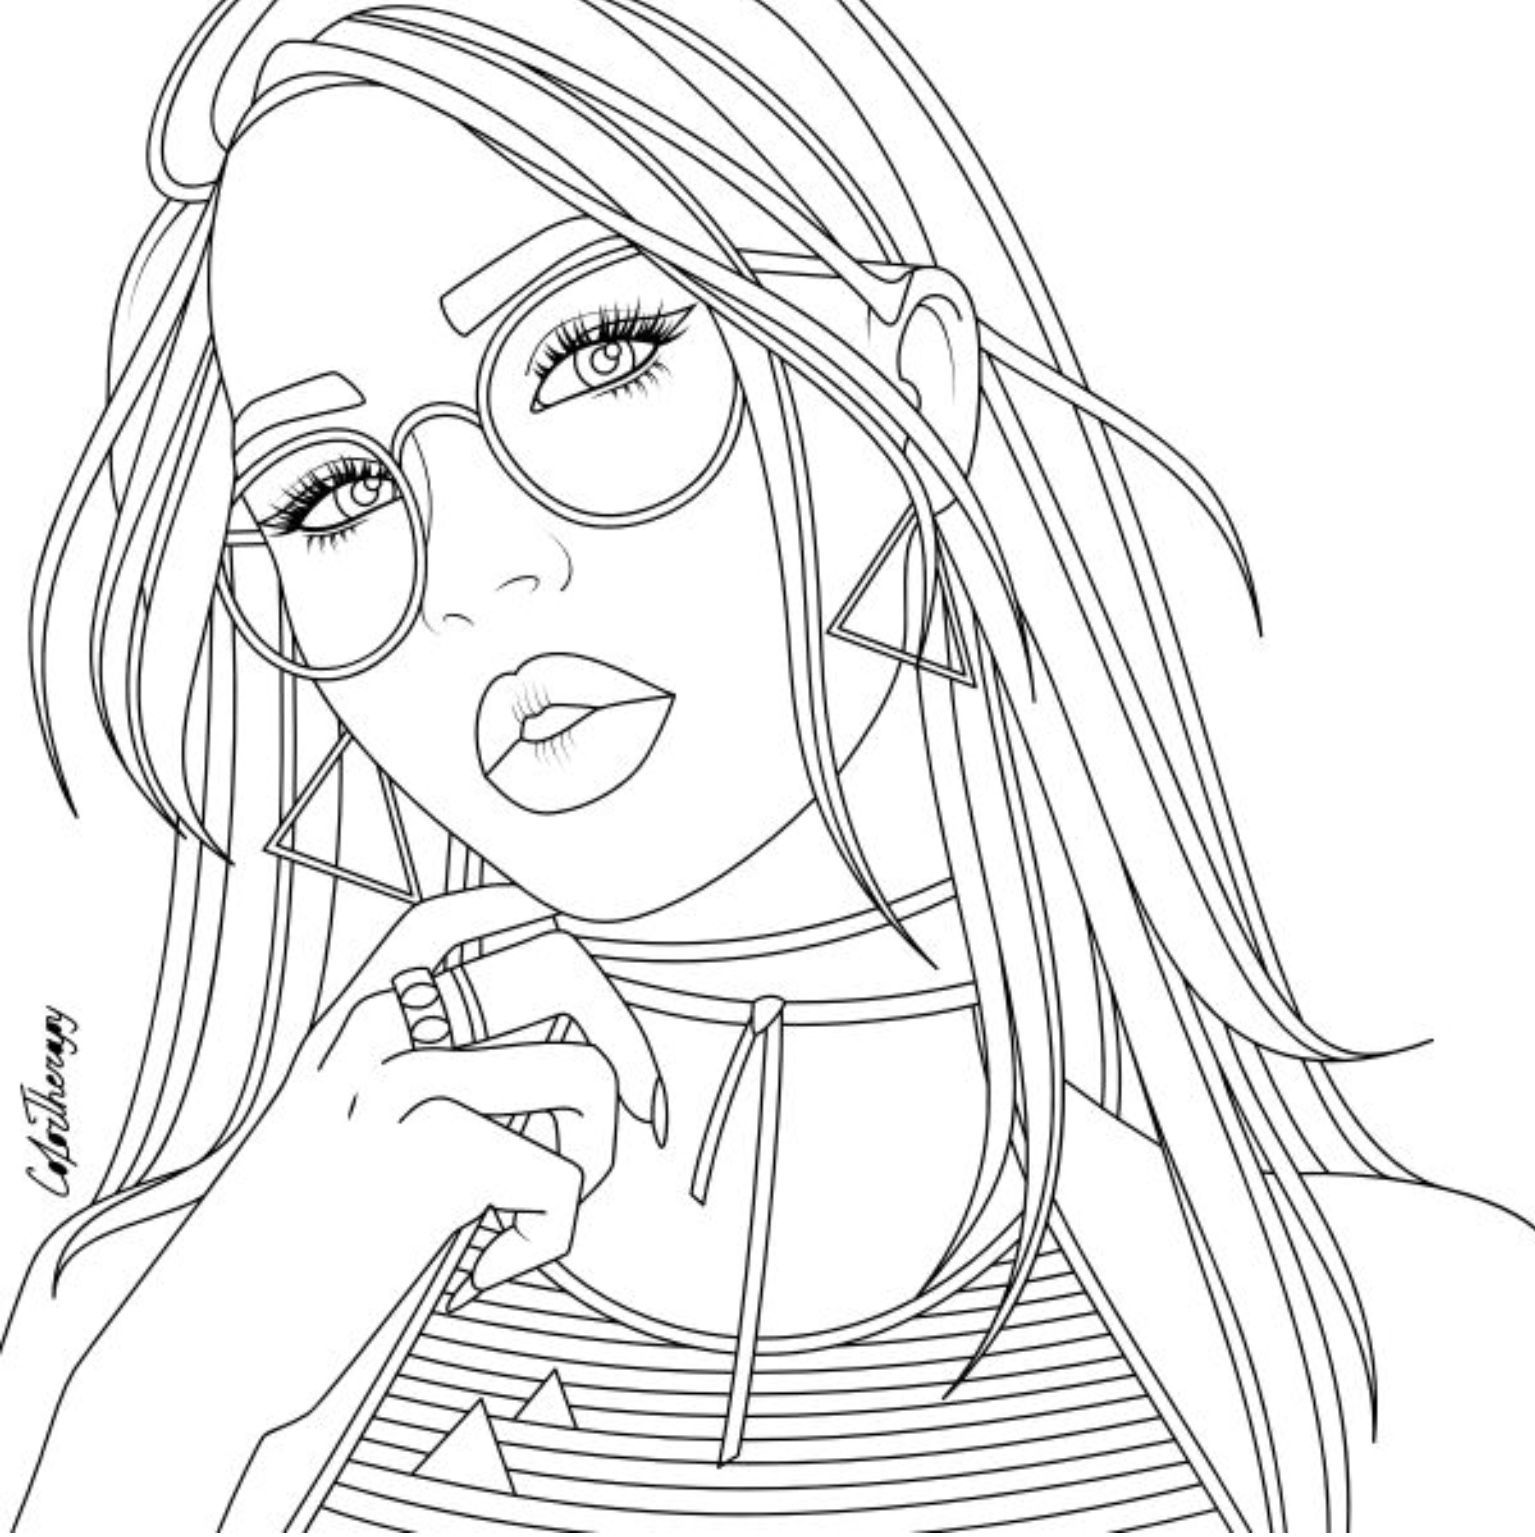 Animexlife people coloring pages cute coloring pages coloring book art